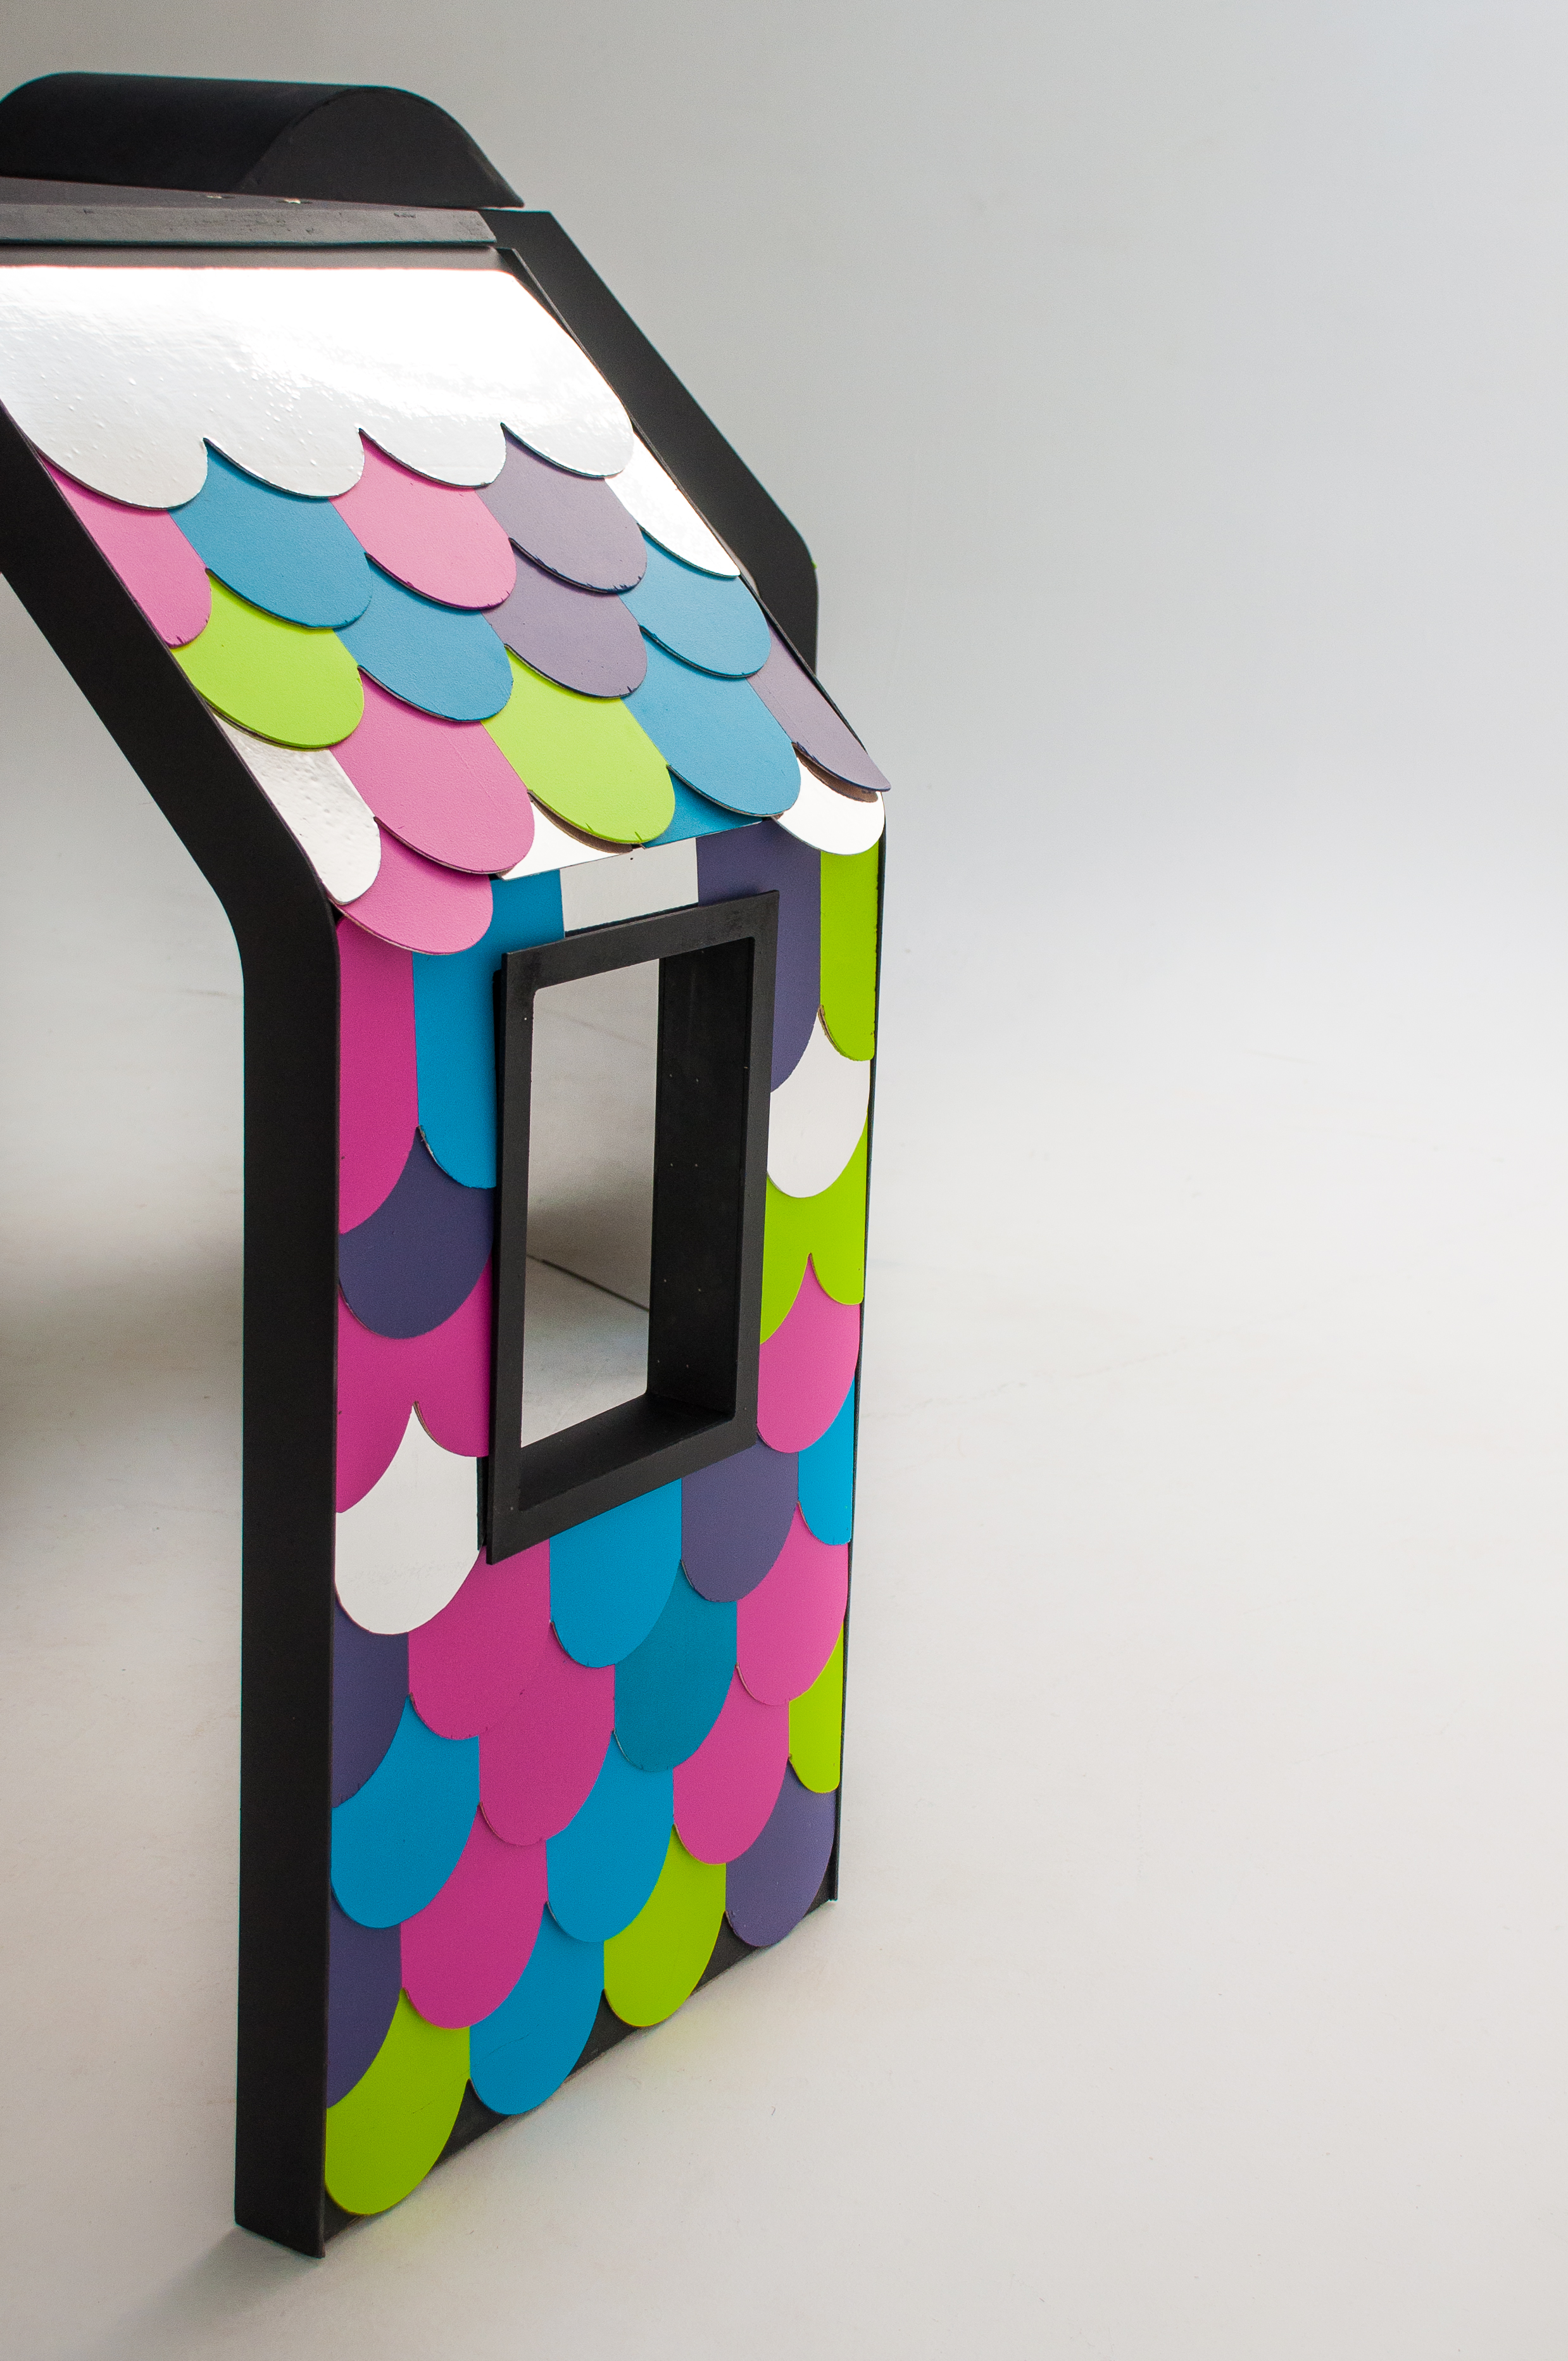  The resulting playhouse, clad in brand-coloured shingles and containing mirrored and magnetic interior surfaces, was designed and fabricated for maximum portability and super quick set-up &amp; tear-down. 